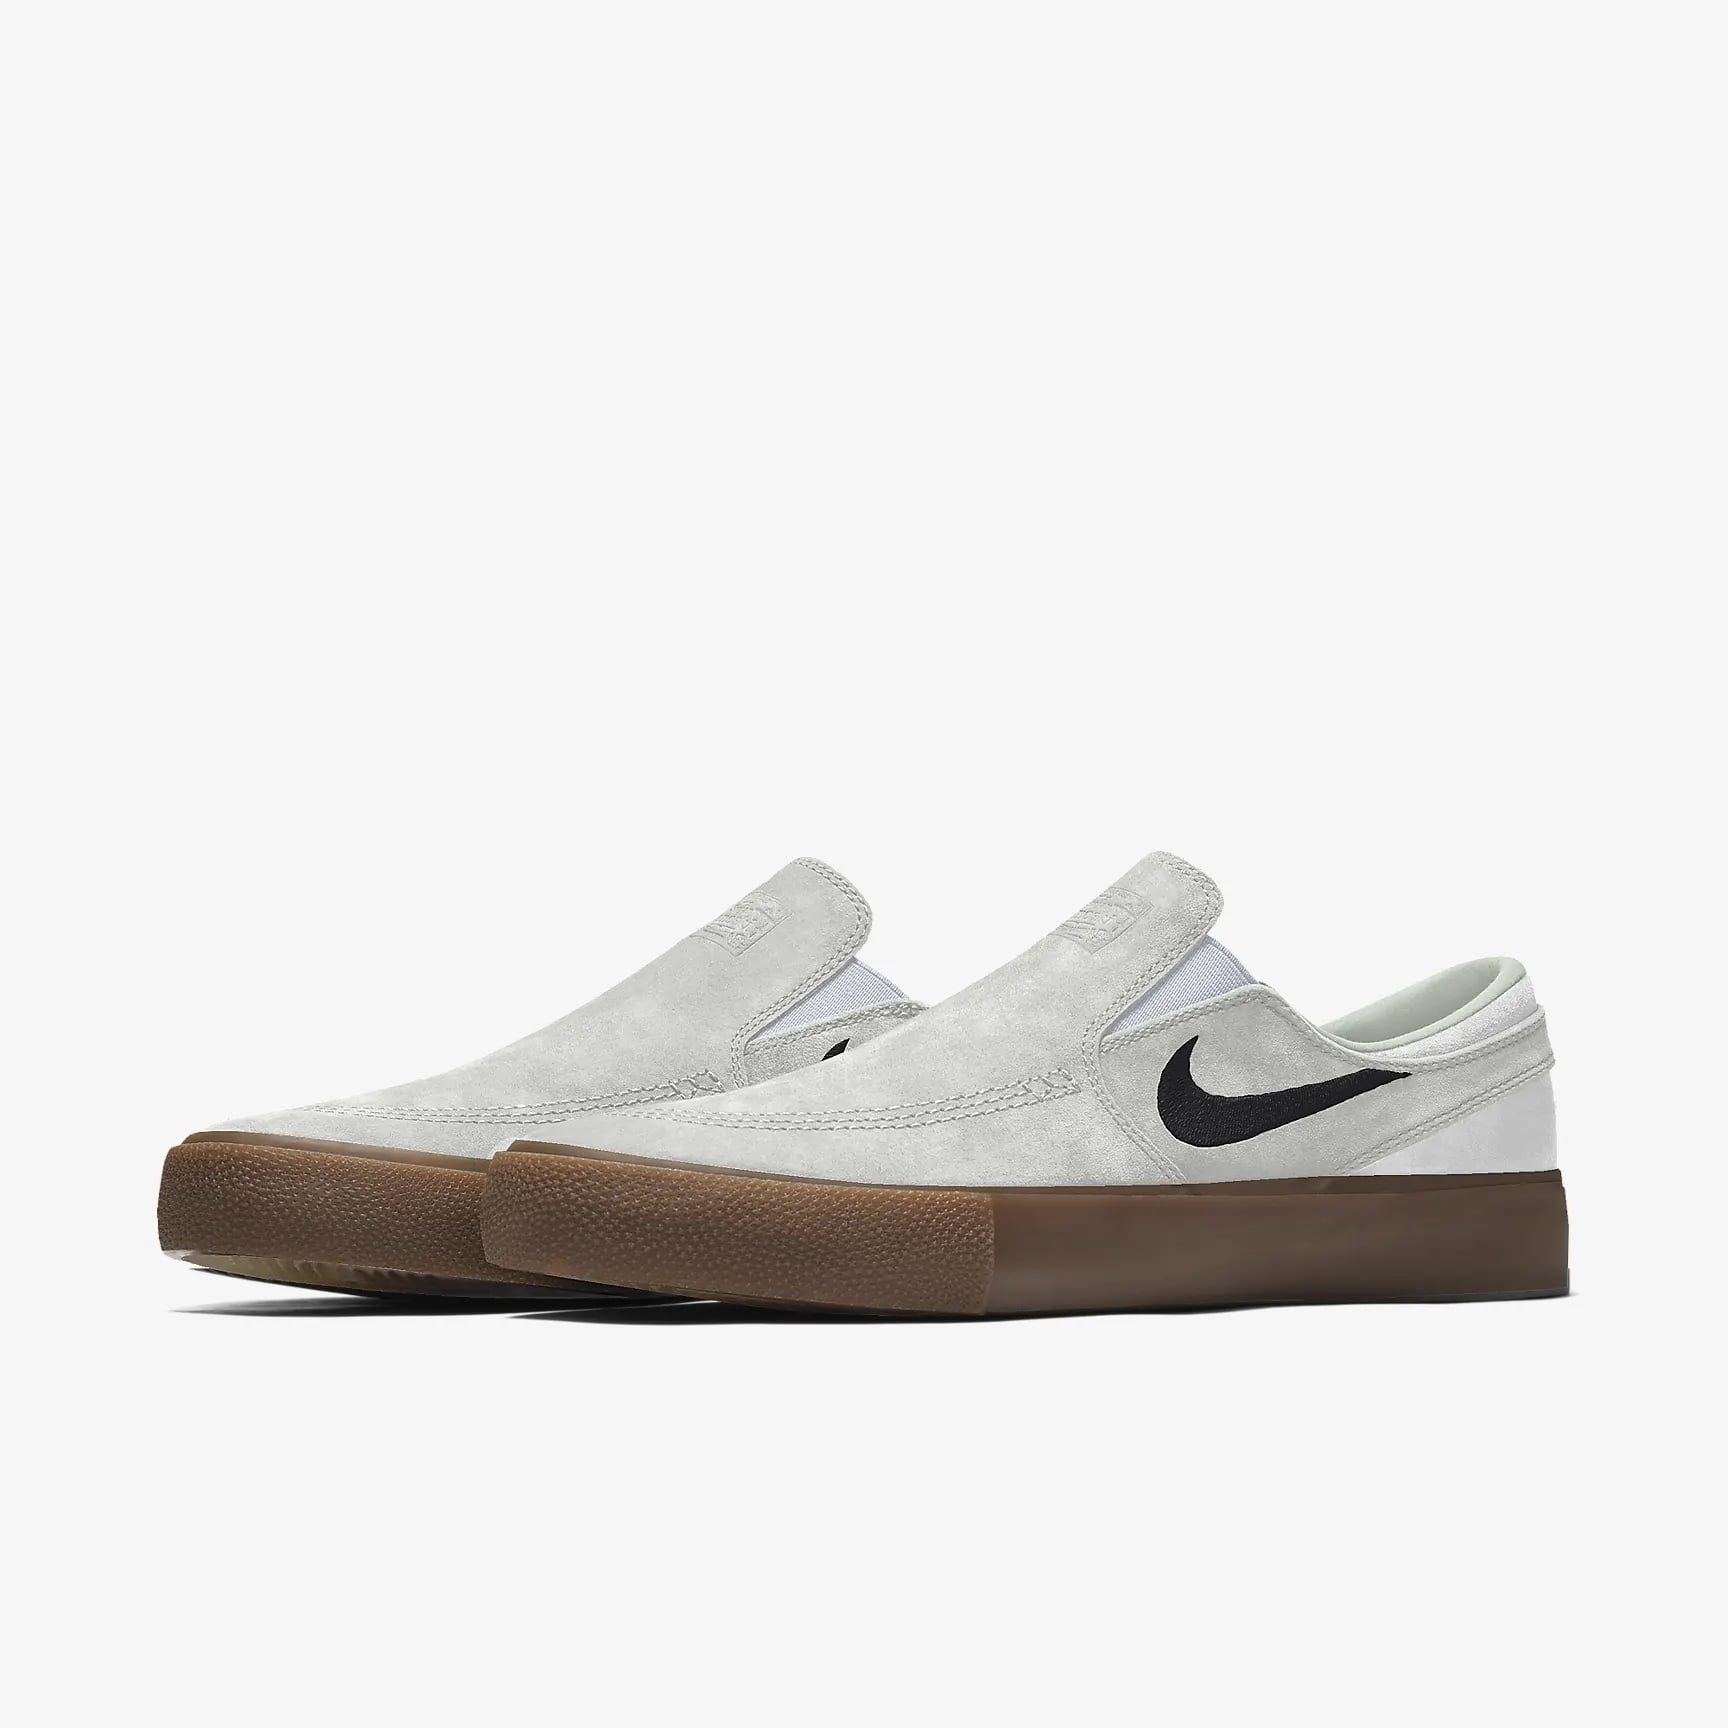 Nike SB Janoski RM You Custom Skate Shoes ($110) | 9 Everyone's So Hyped Up About the Skateboarders' Style at the Olympics | Fashion Photo 11